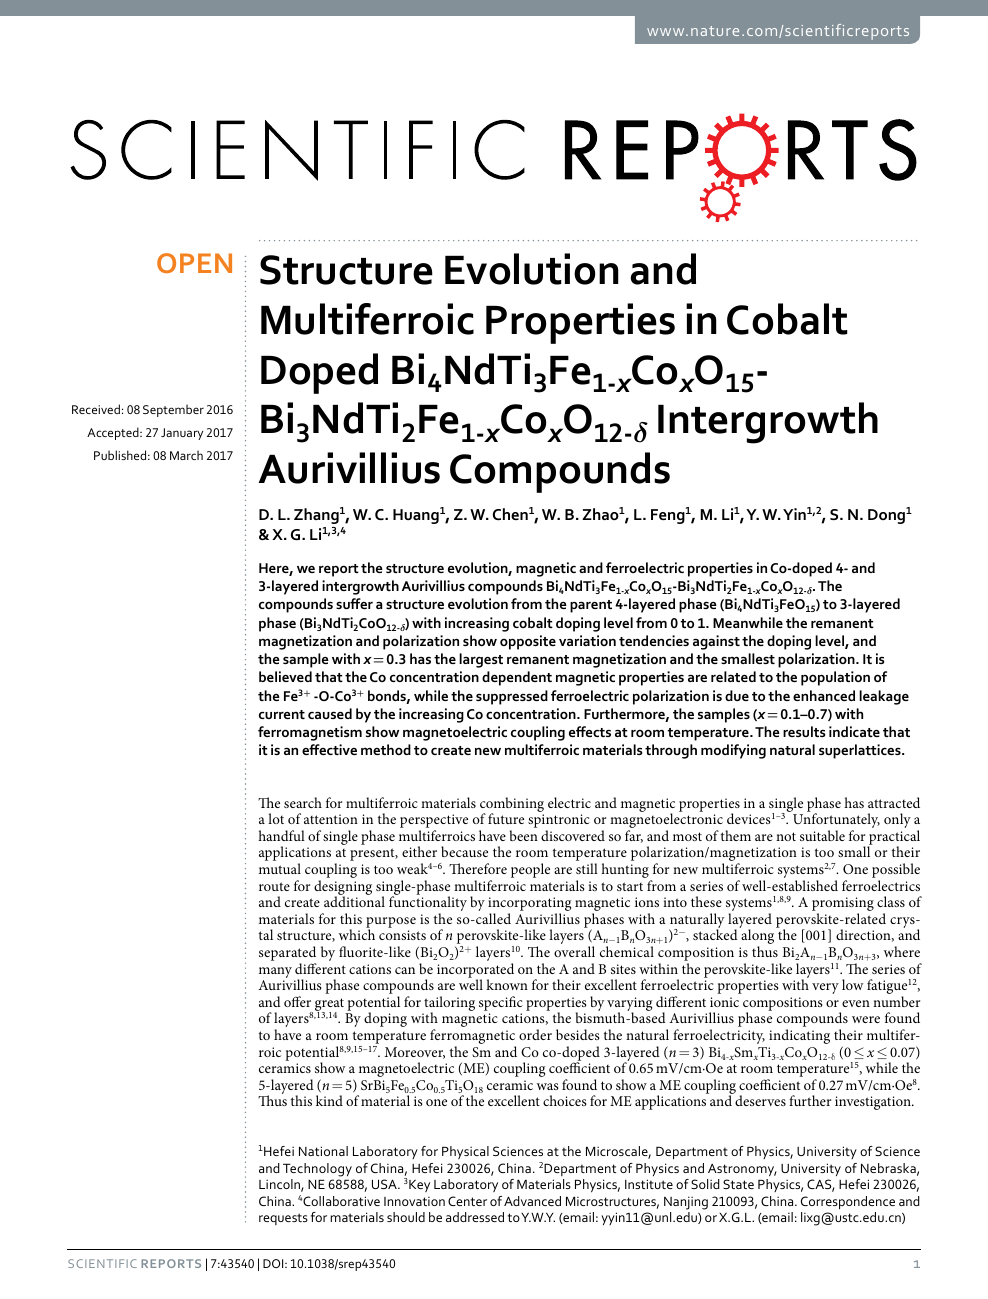 Structure Evolution And Multiferroic Properties In Cobalt Doped Bi4ndti3fe1 Xcoxo15 Bi3ndti2fe1 Xcoxo12 D Intergrowth Aurivillius Compounds Topic Of Research Paper In Materials Engineering Download Scholarly Article Pdf And Read For Free On